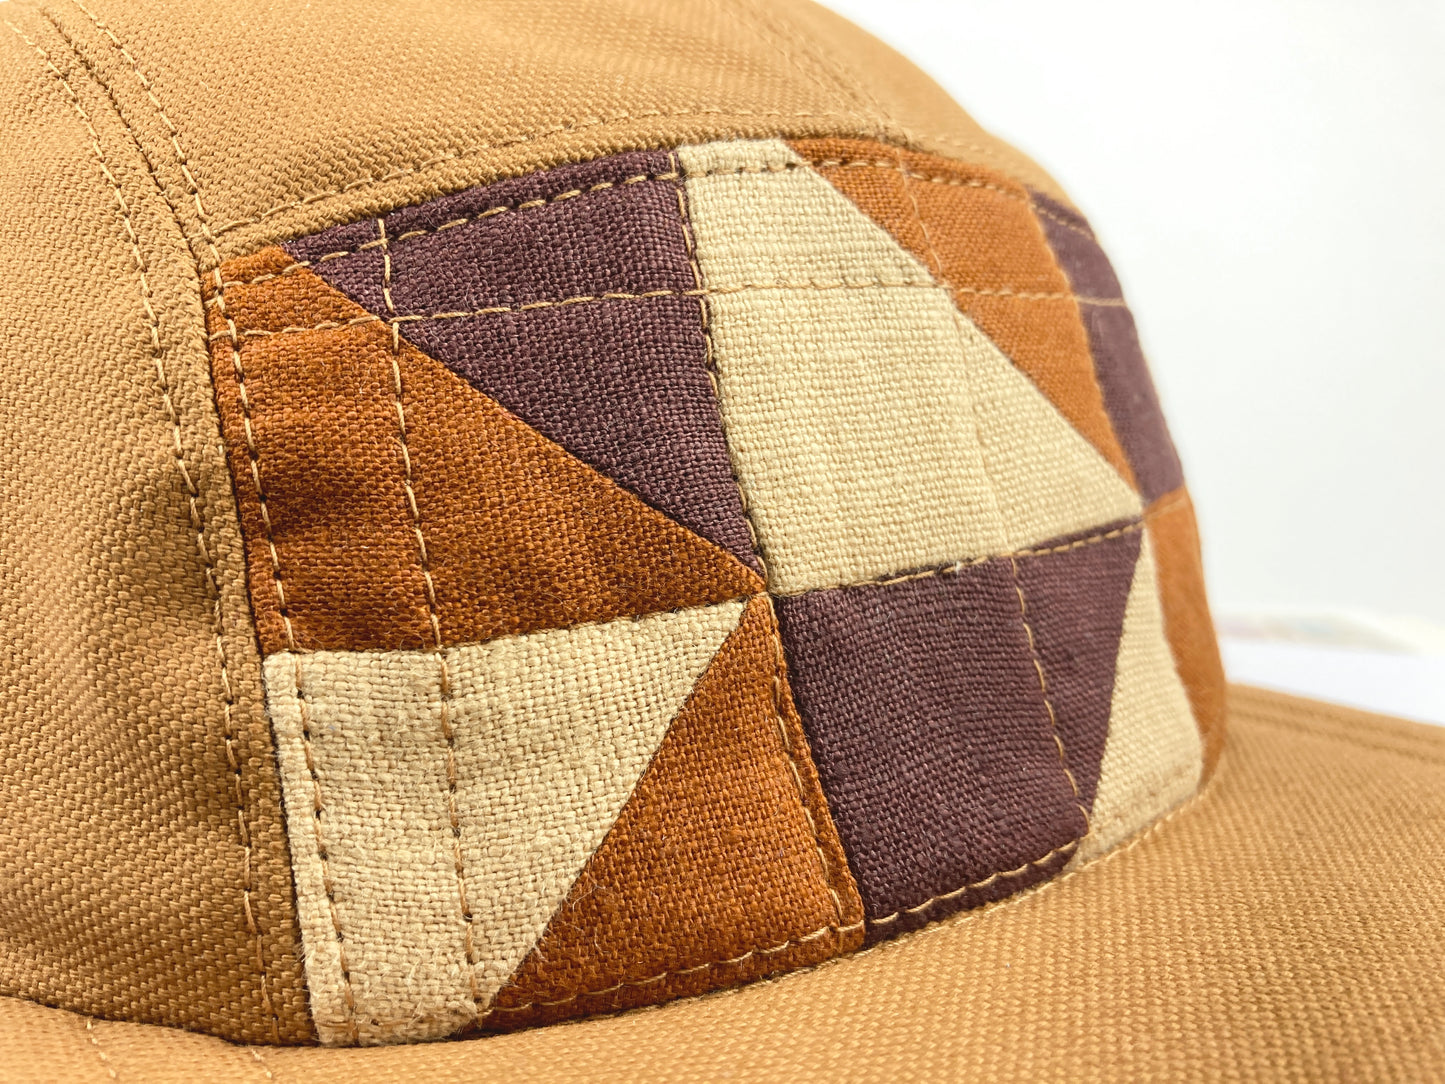 Quilted Camp Hat - Shift #3